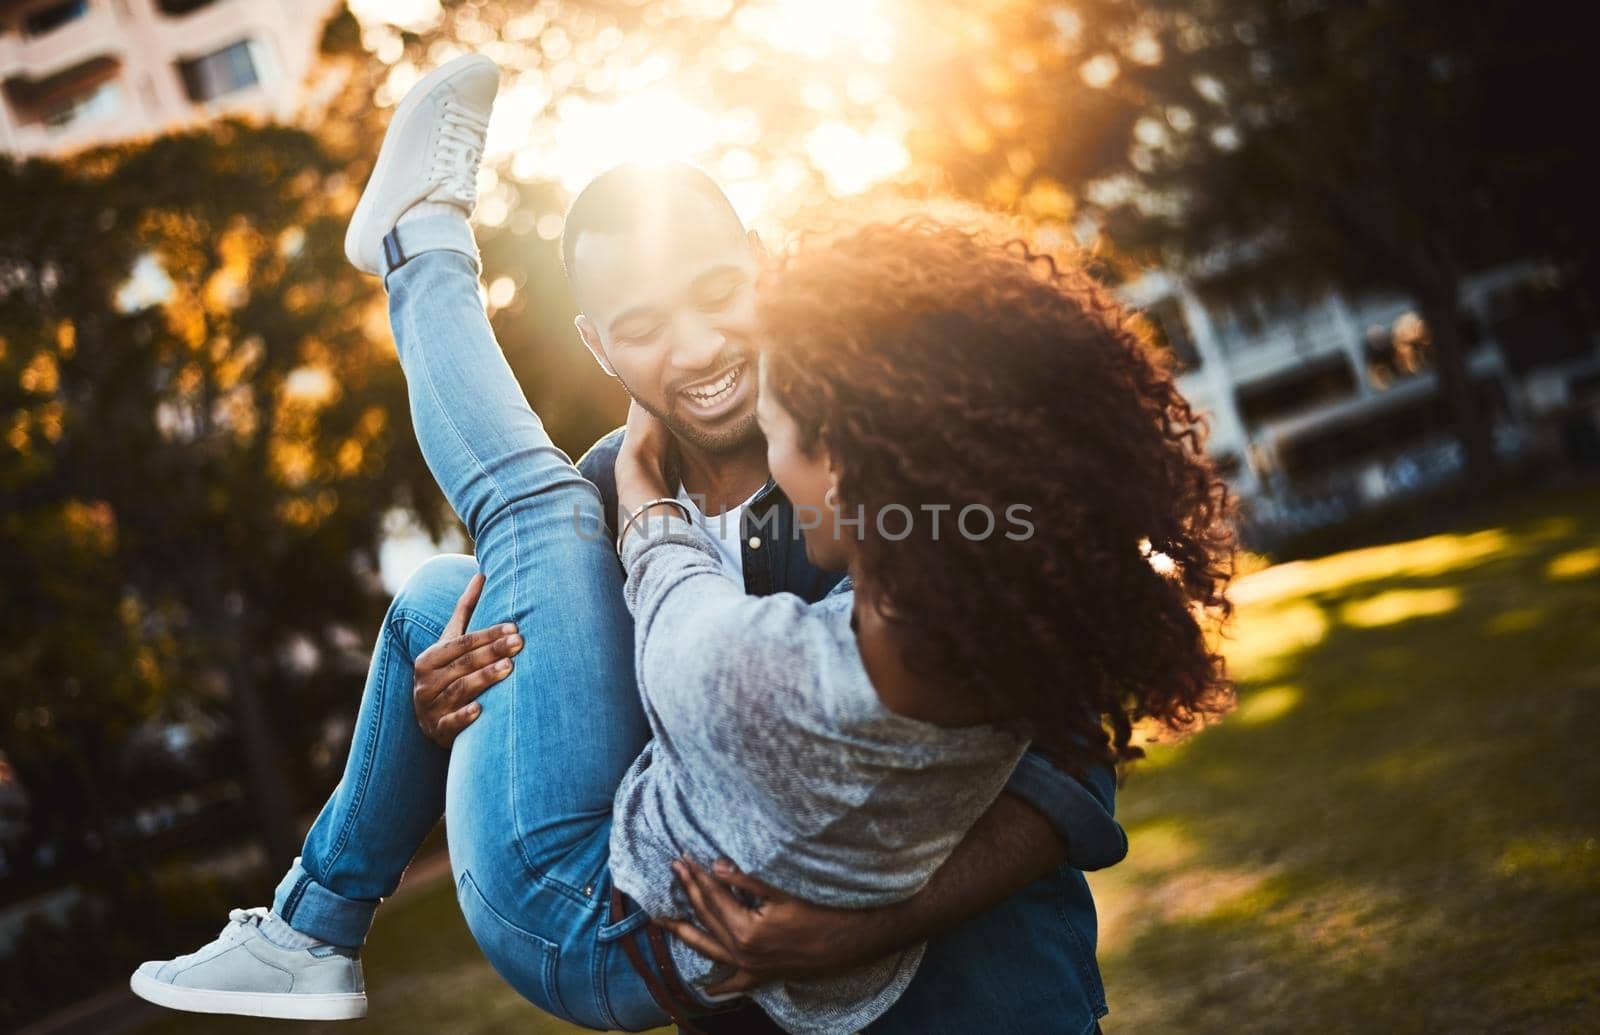 Shot of a young couple having fun together outdoors.